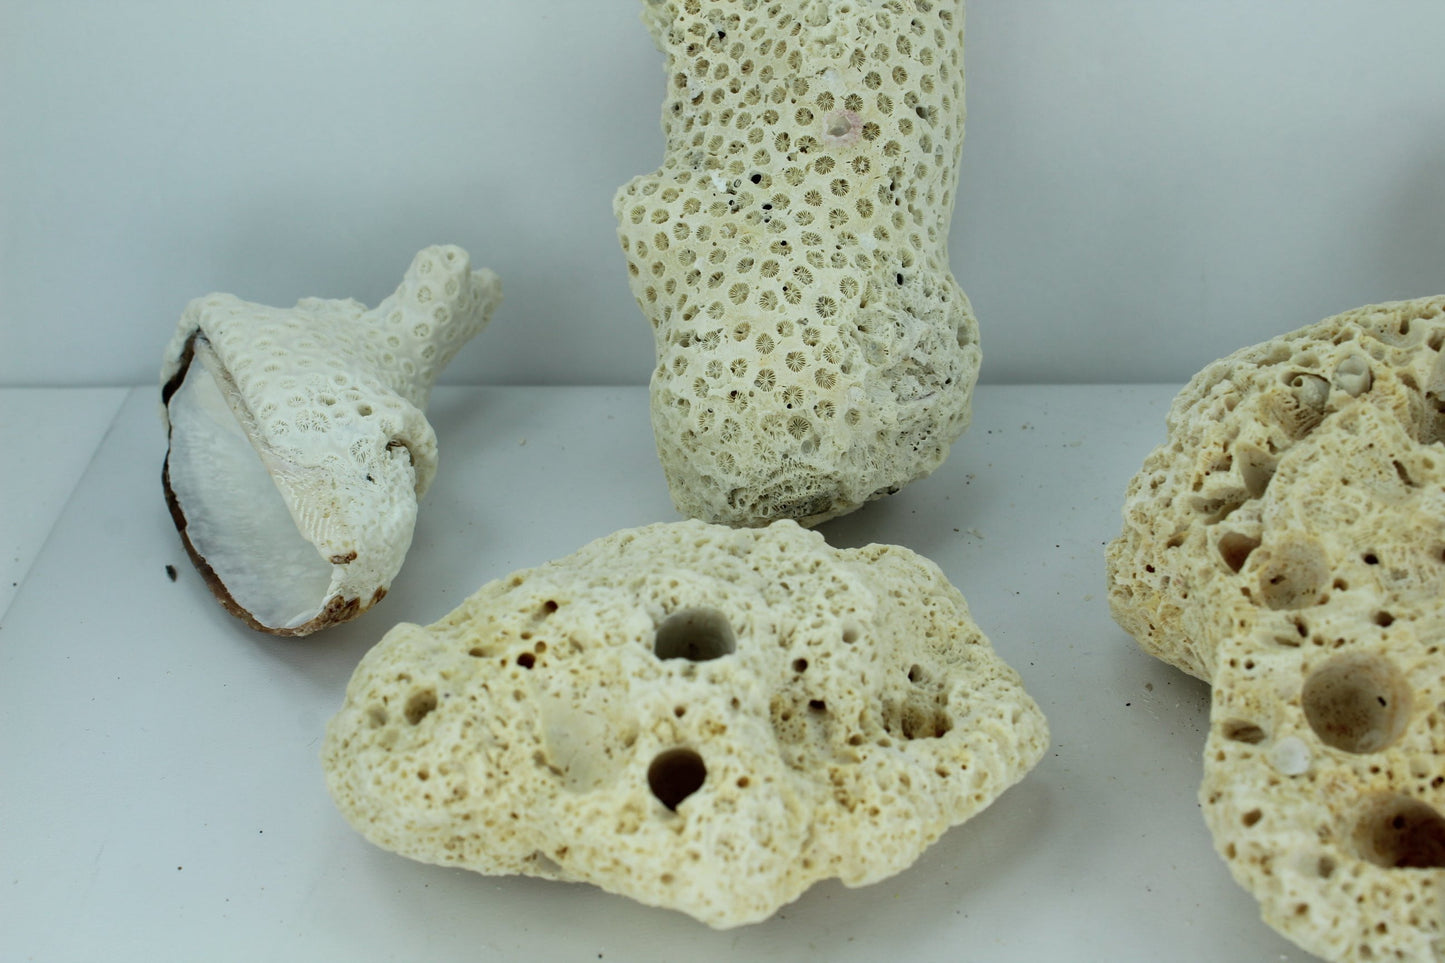 Natural Coral Fossils 6 Unique Pieces 5" to 3" Barnacles Estate Collection Aquarium Shell Art Collectibles shell embed